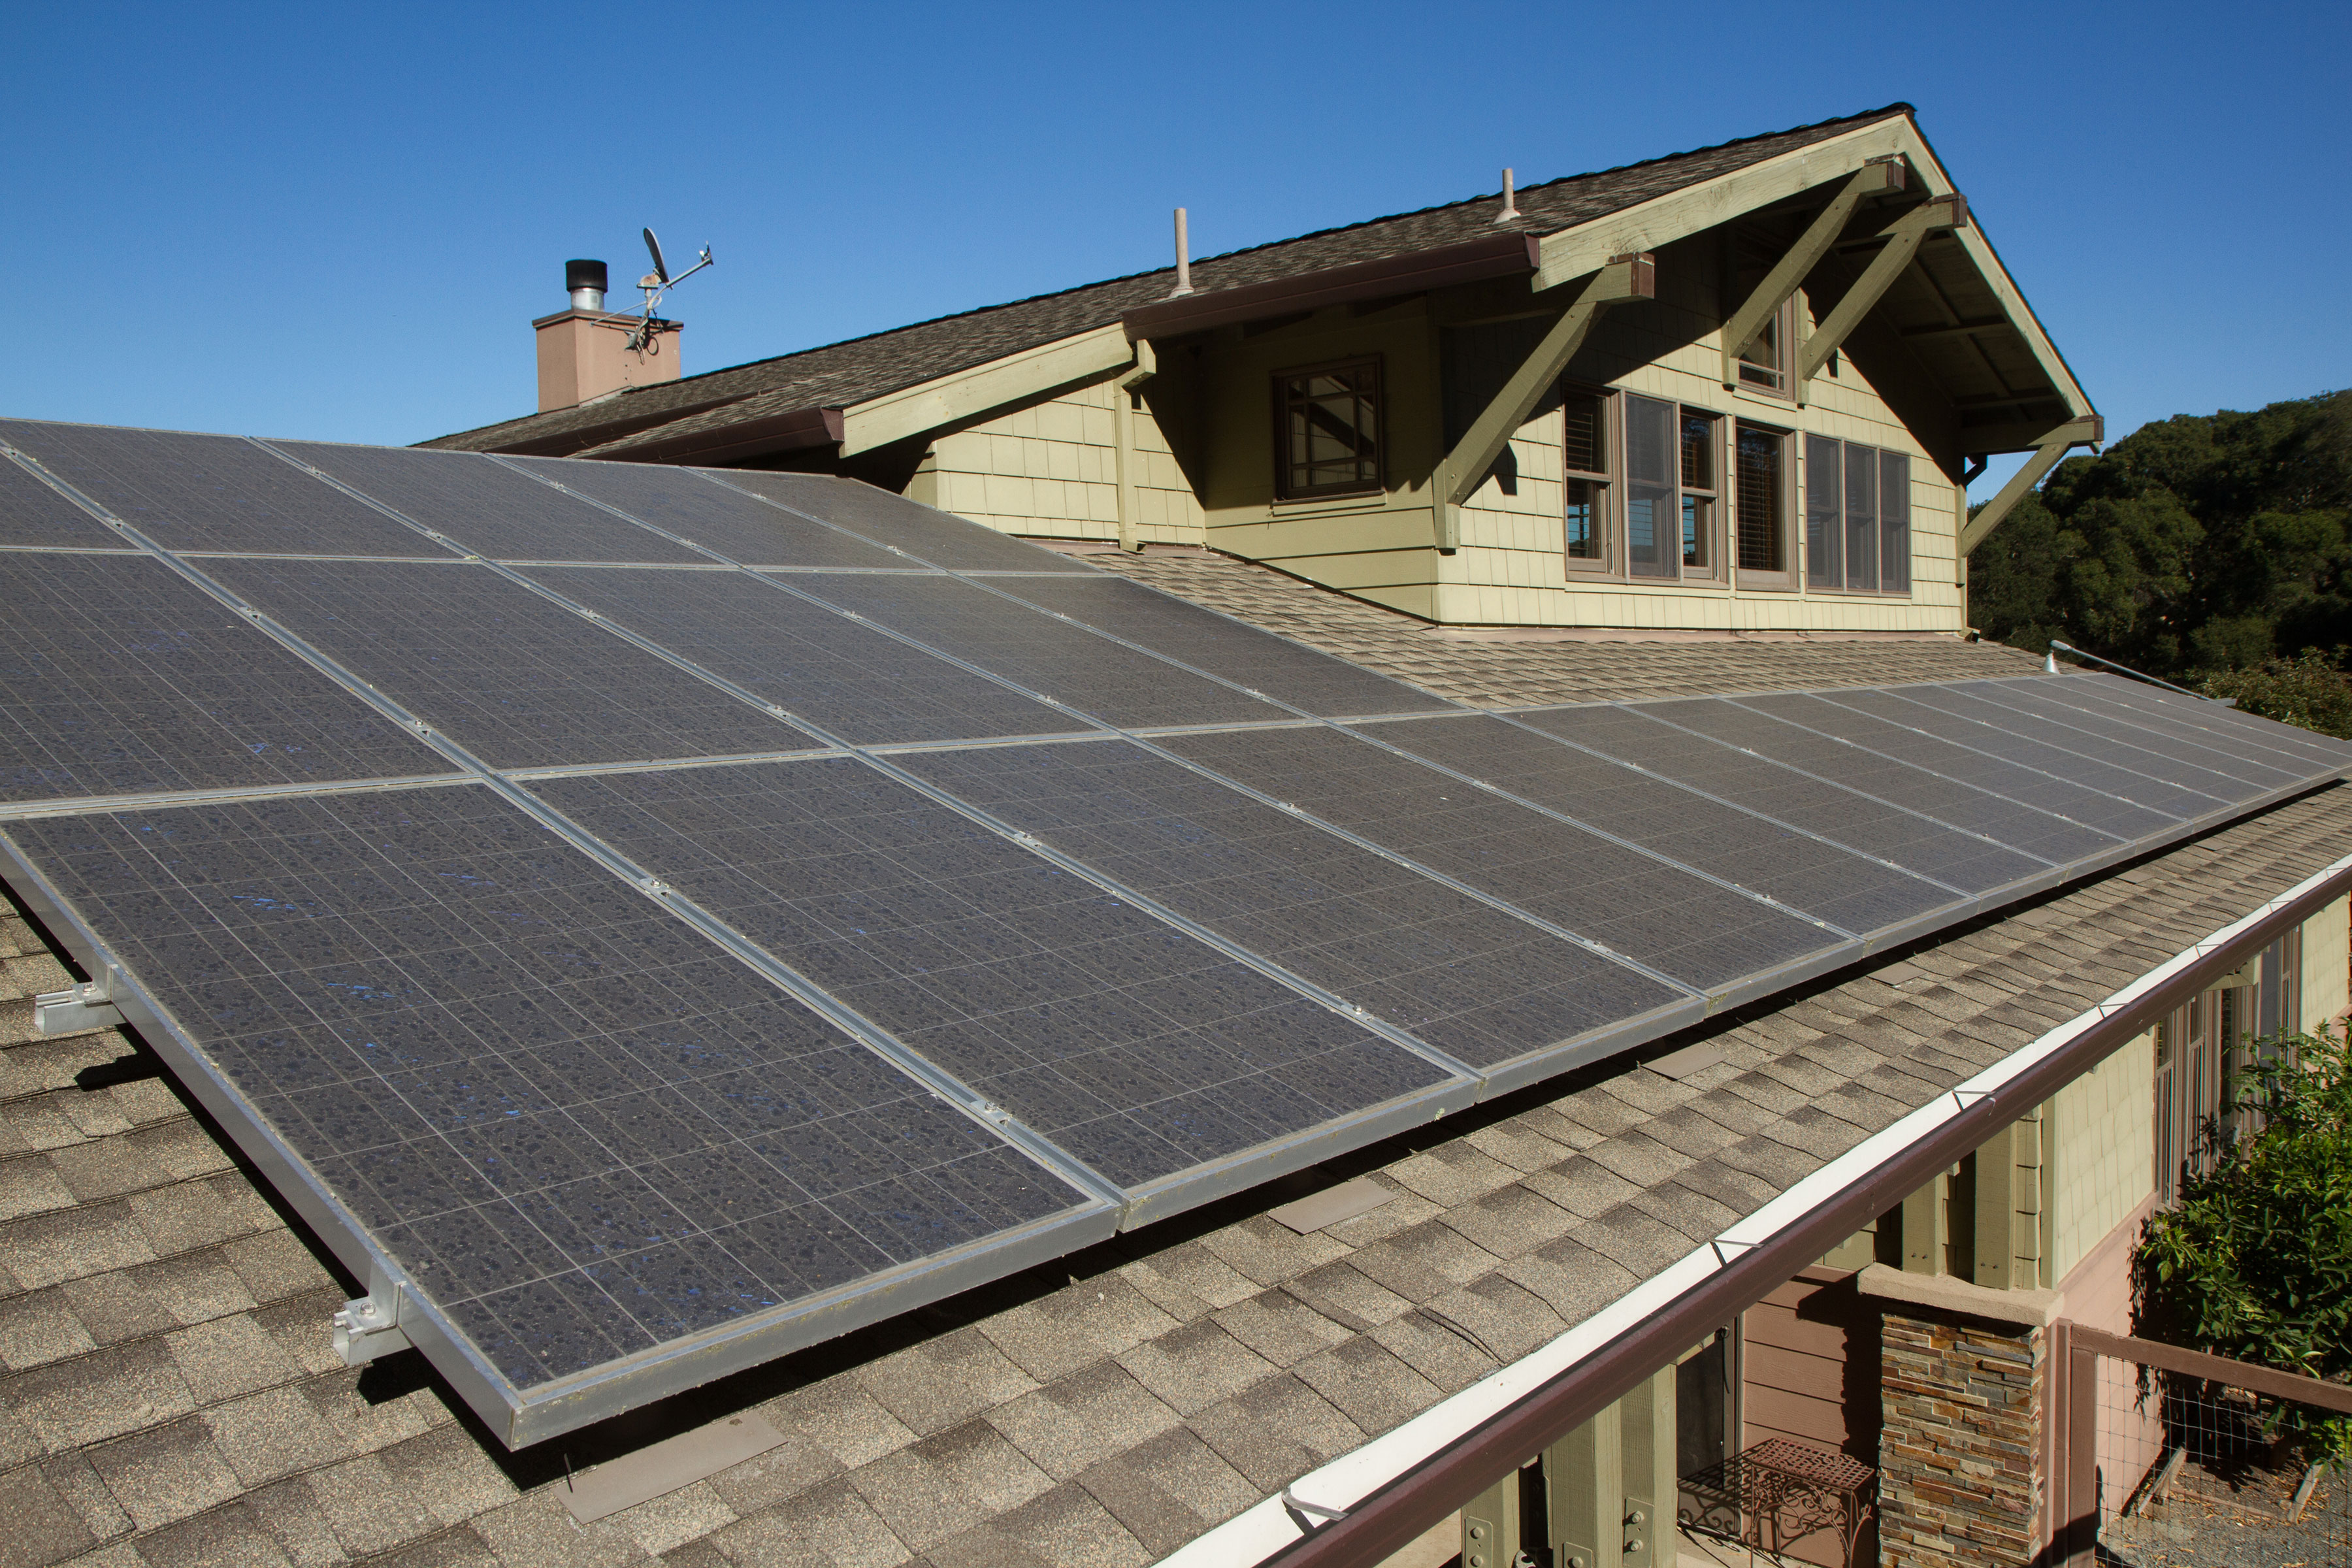 Solar panels on a craftsman home